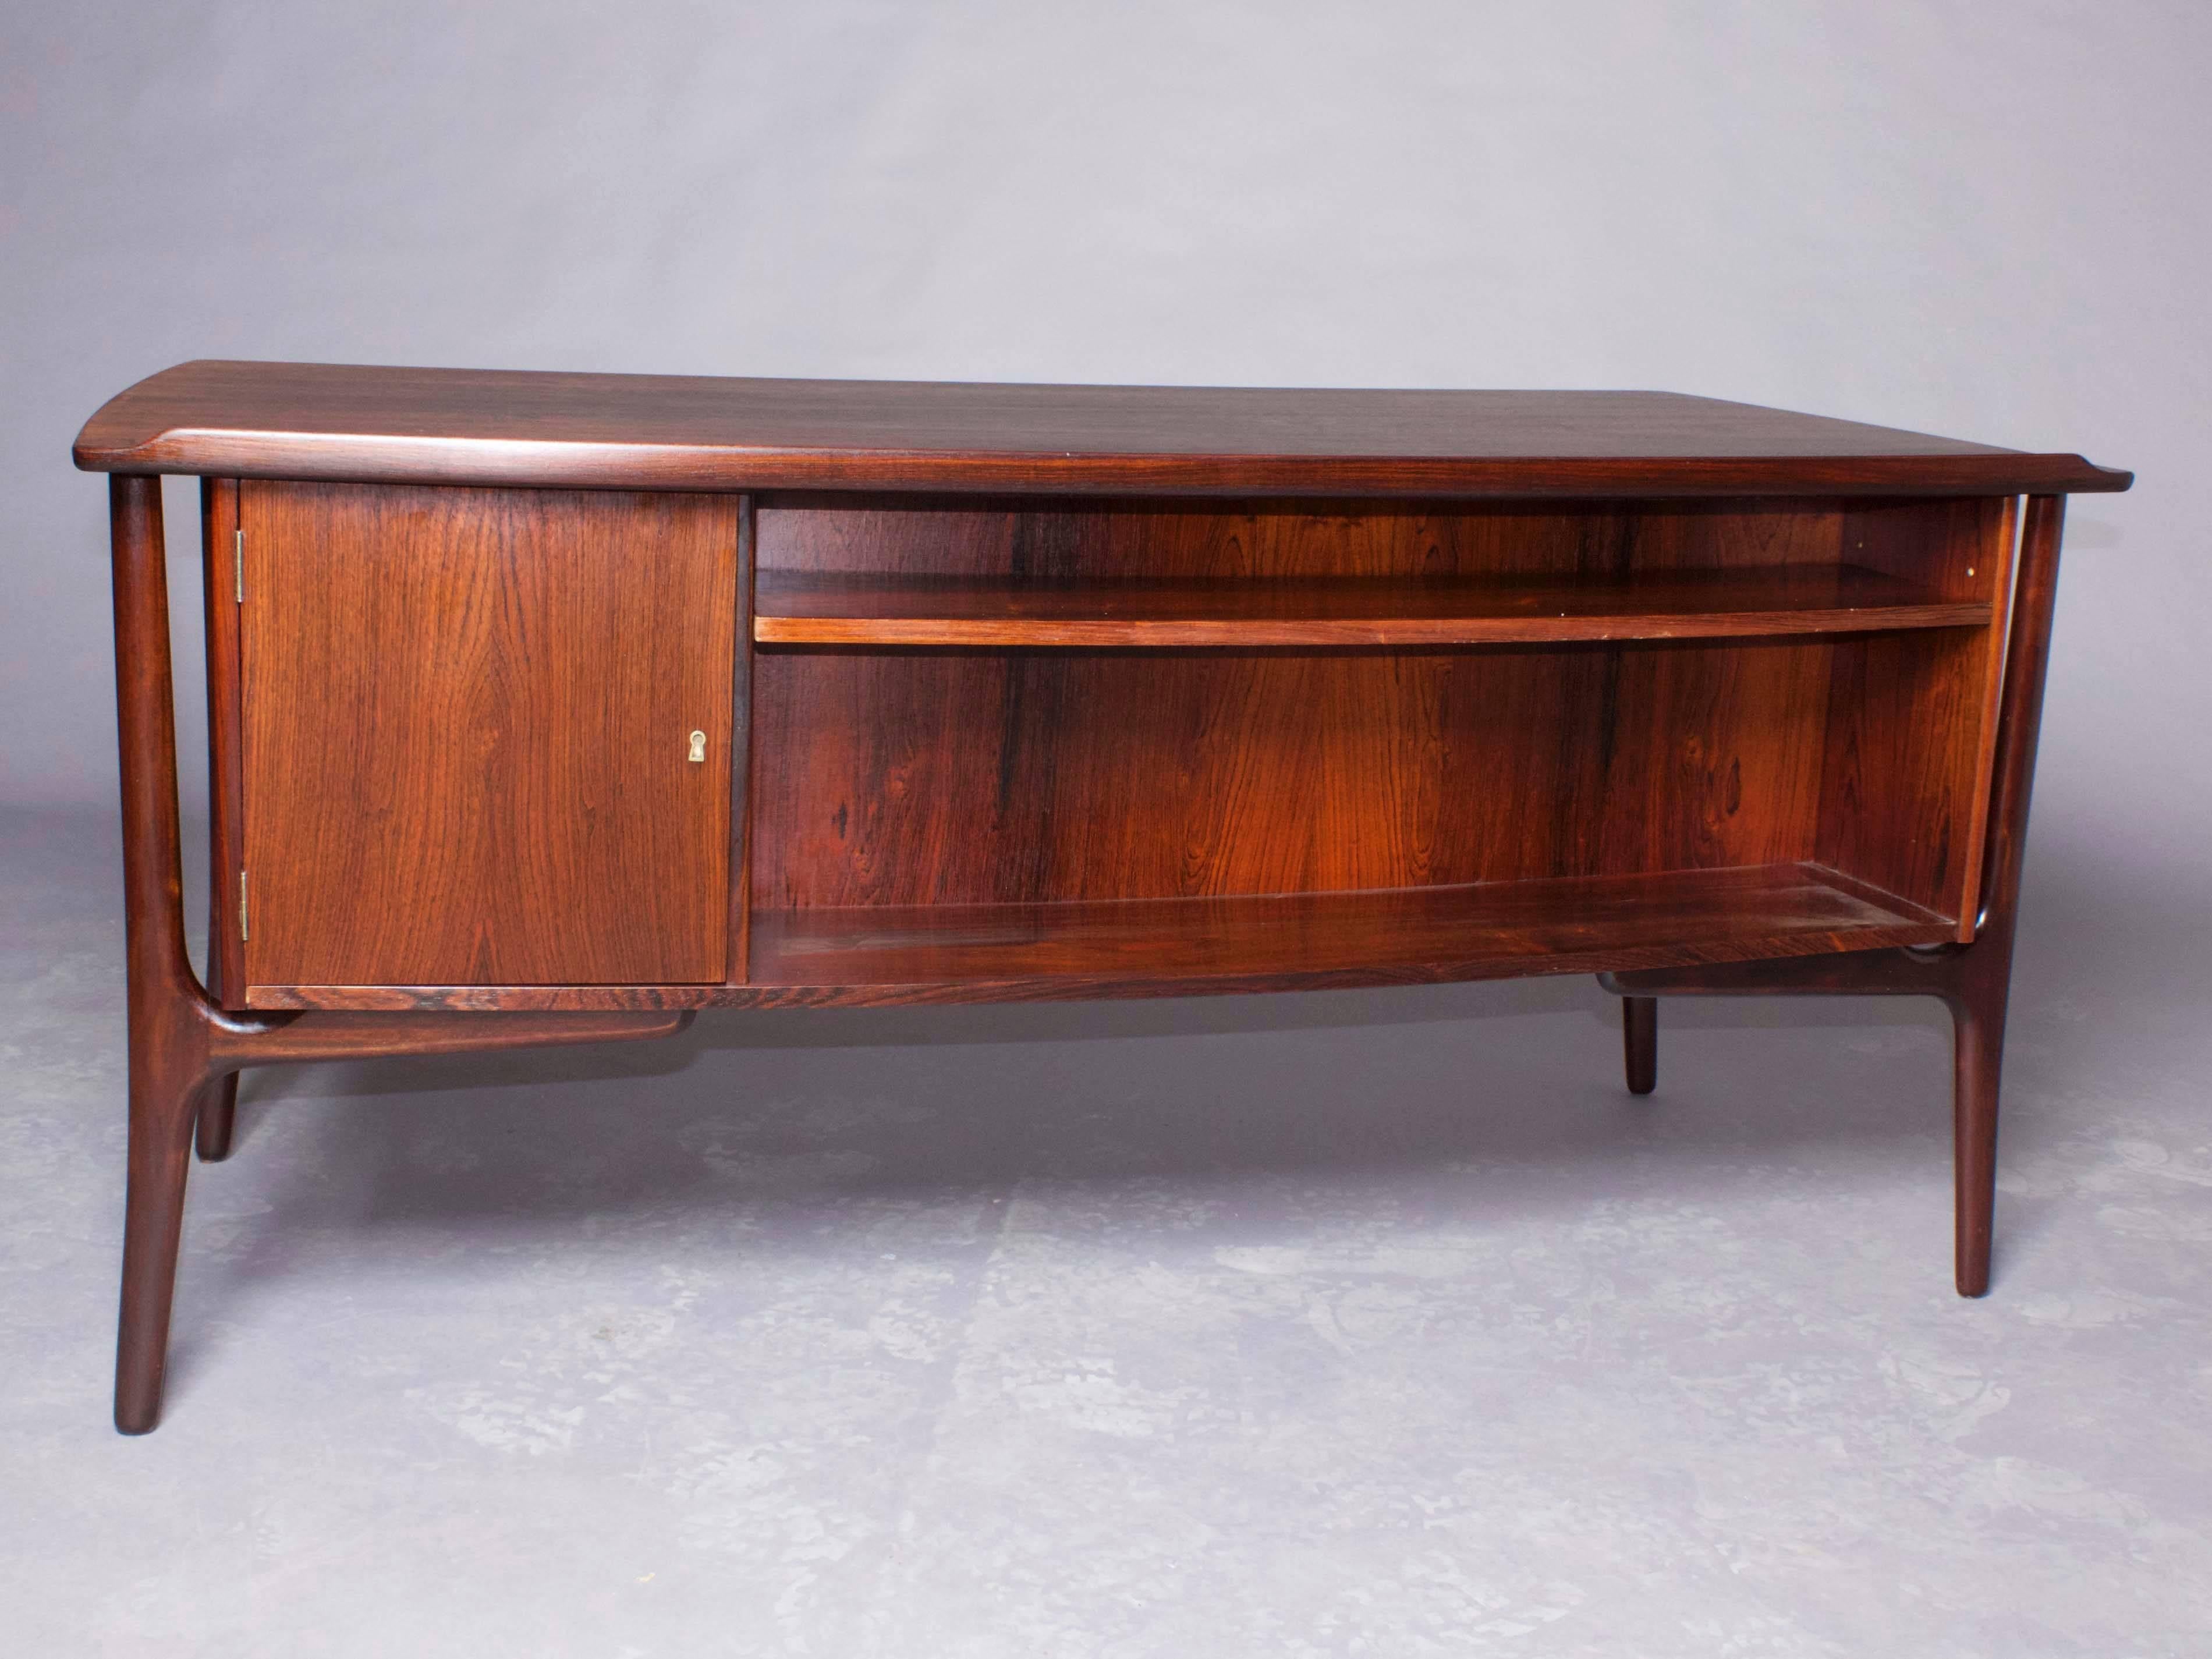 Vintage 1960s Svend Madsen Desk

Danish mid century modern 8 drawer executive desk by Svend Aage Madsen, produced by H.P. Hansen. Beautiful grain, back storage and locking cabinet highlight this superb desk. Blemish on upper right hand and lock on